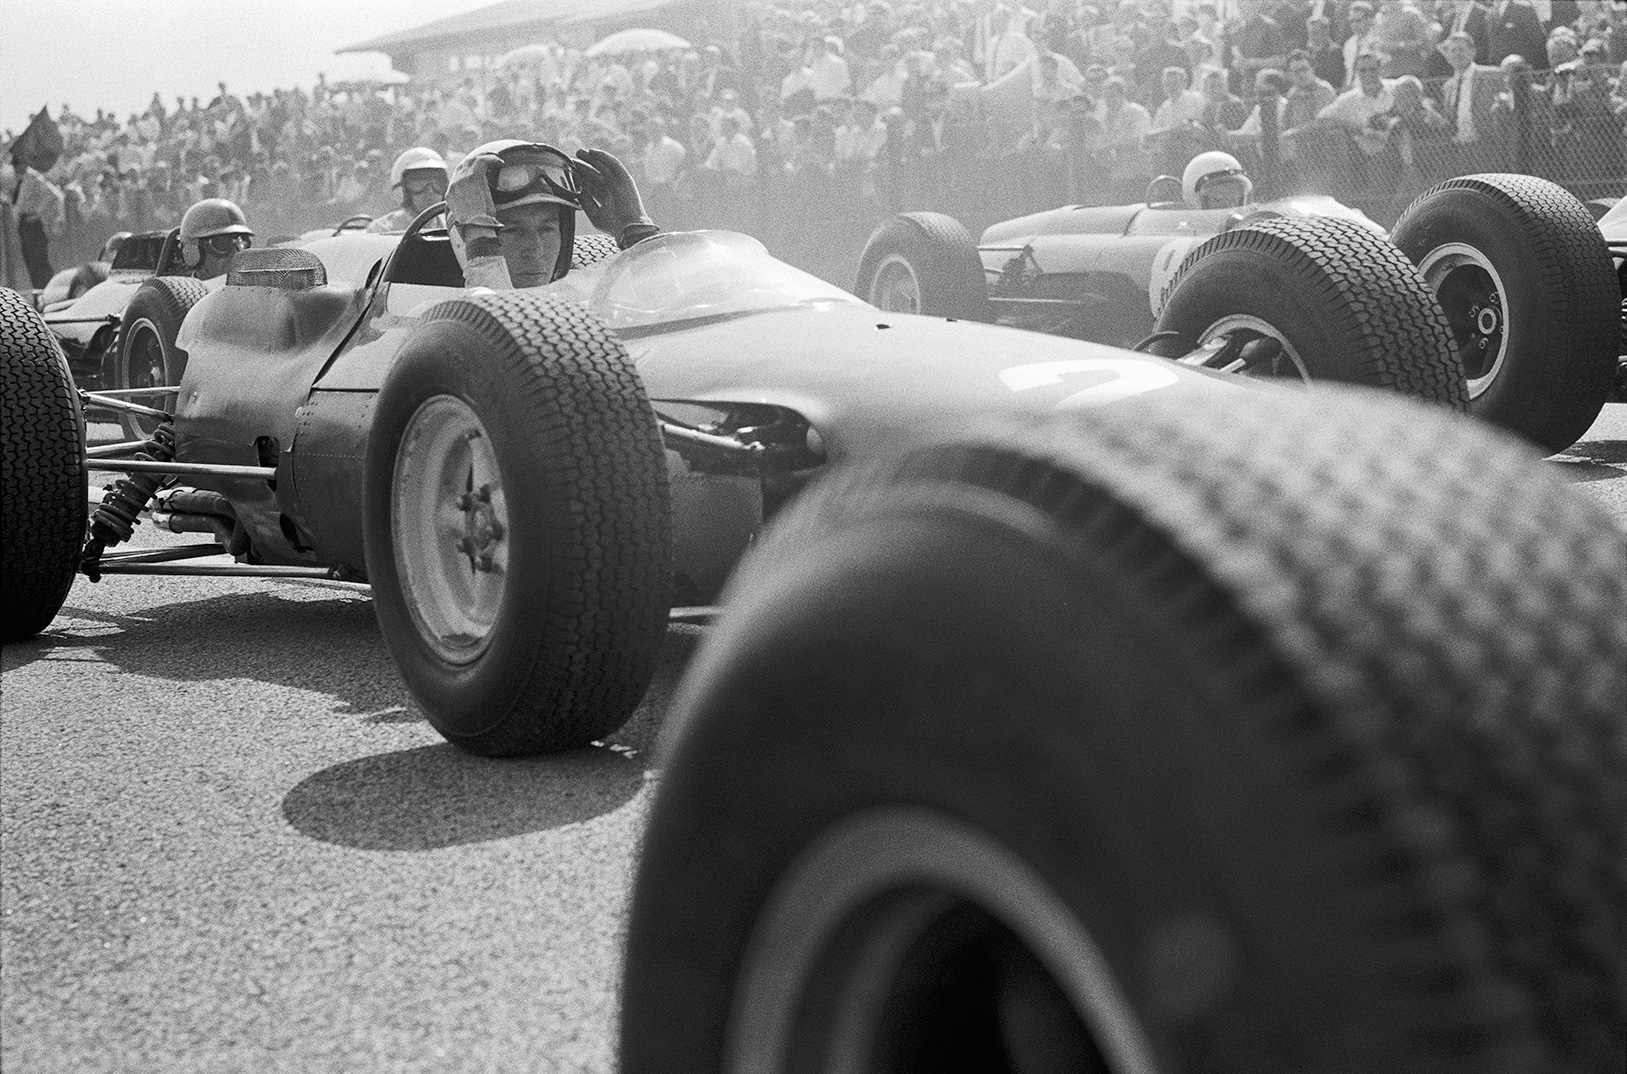  "John Surtees in the thick of the action at the Dutch GP in 1964. Amazing access so close to the cars at the start."